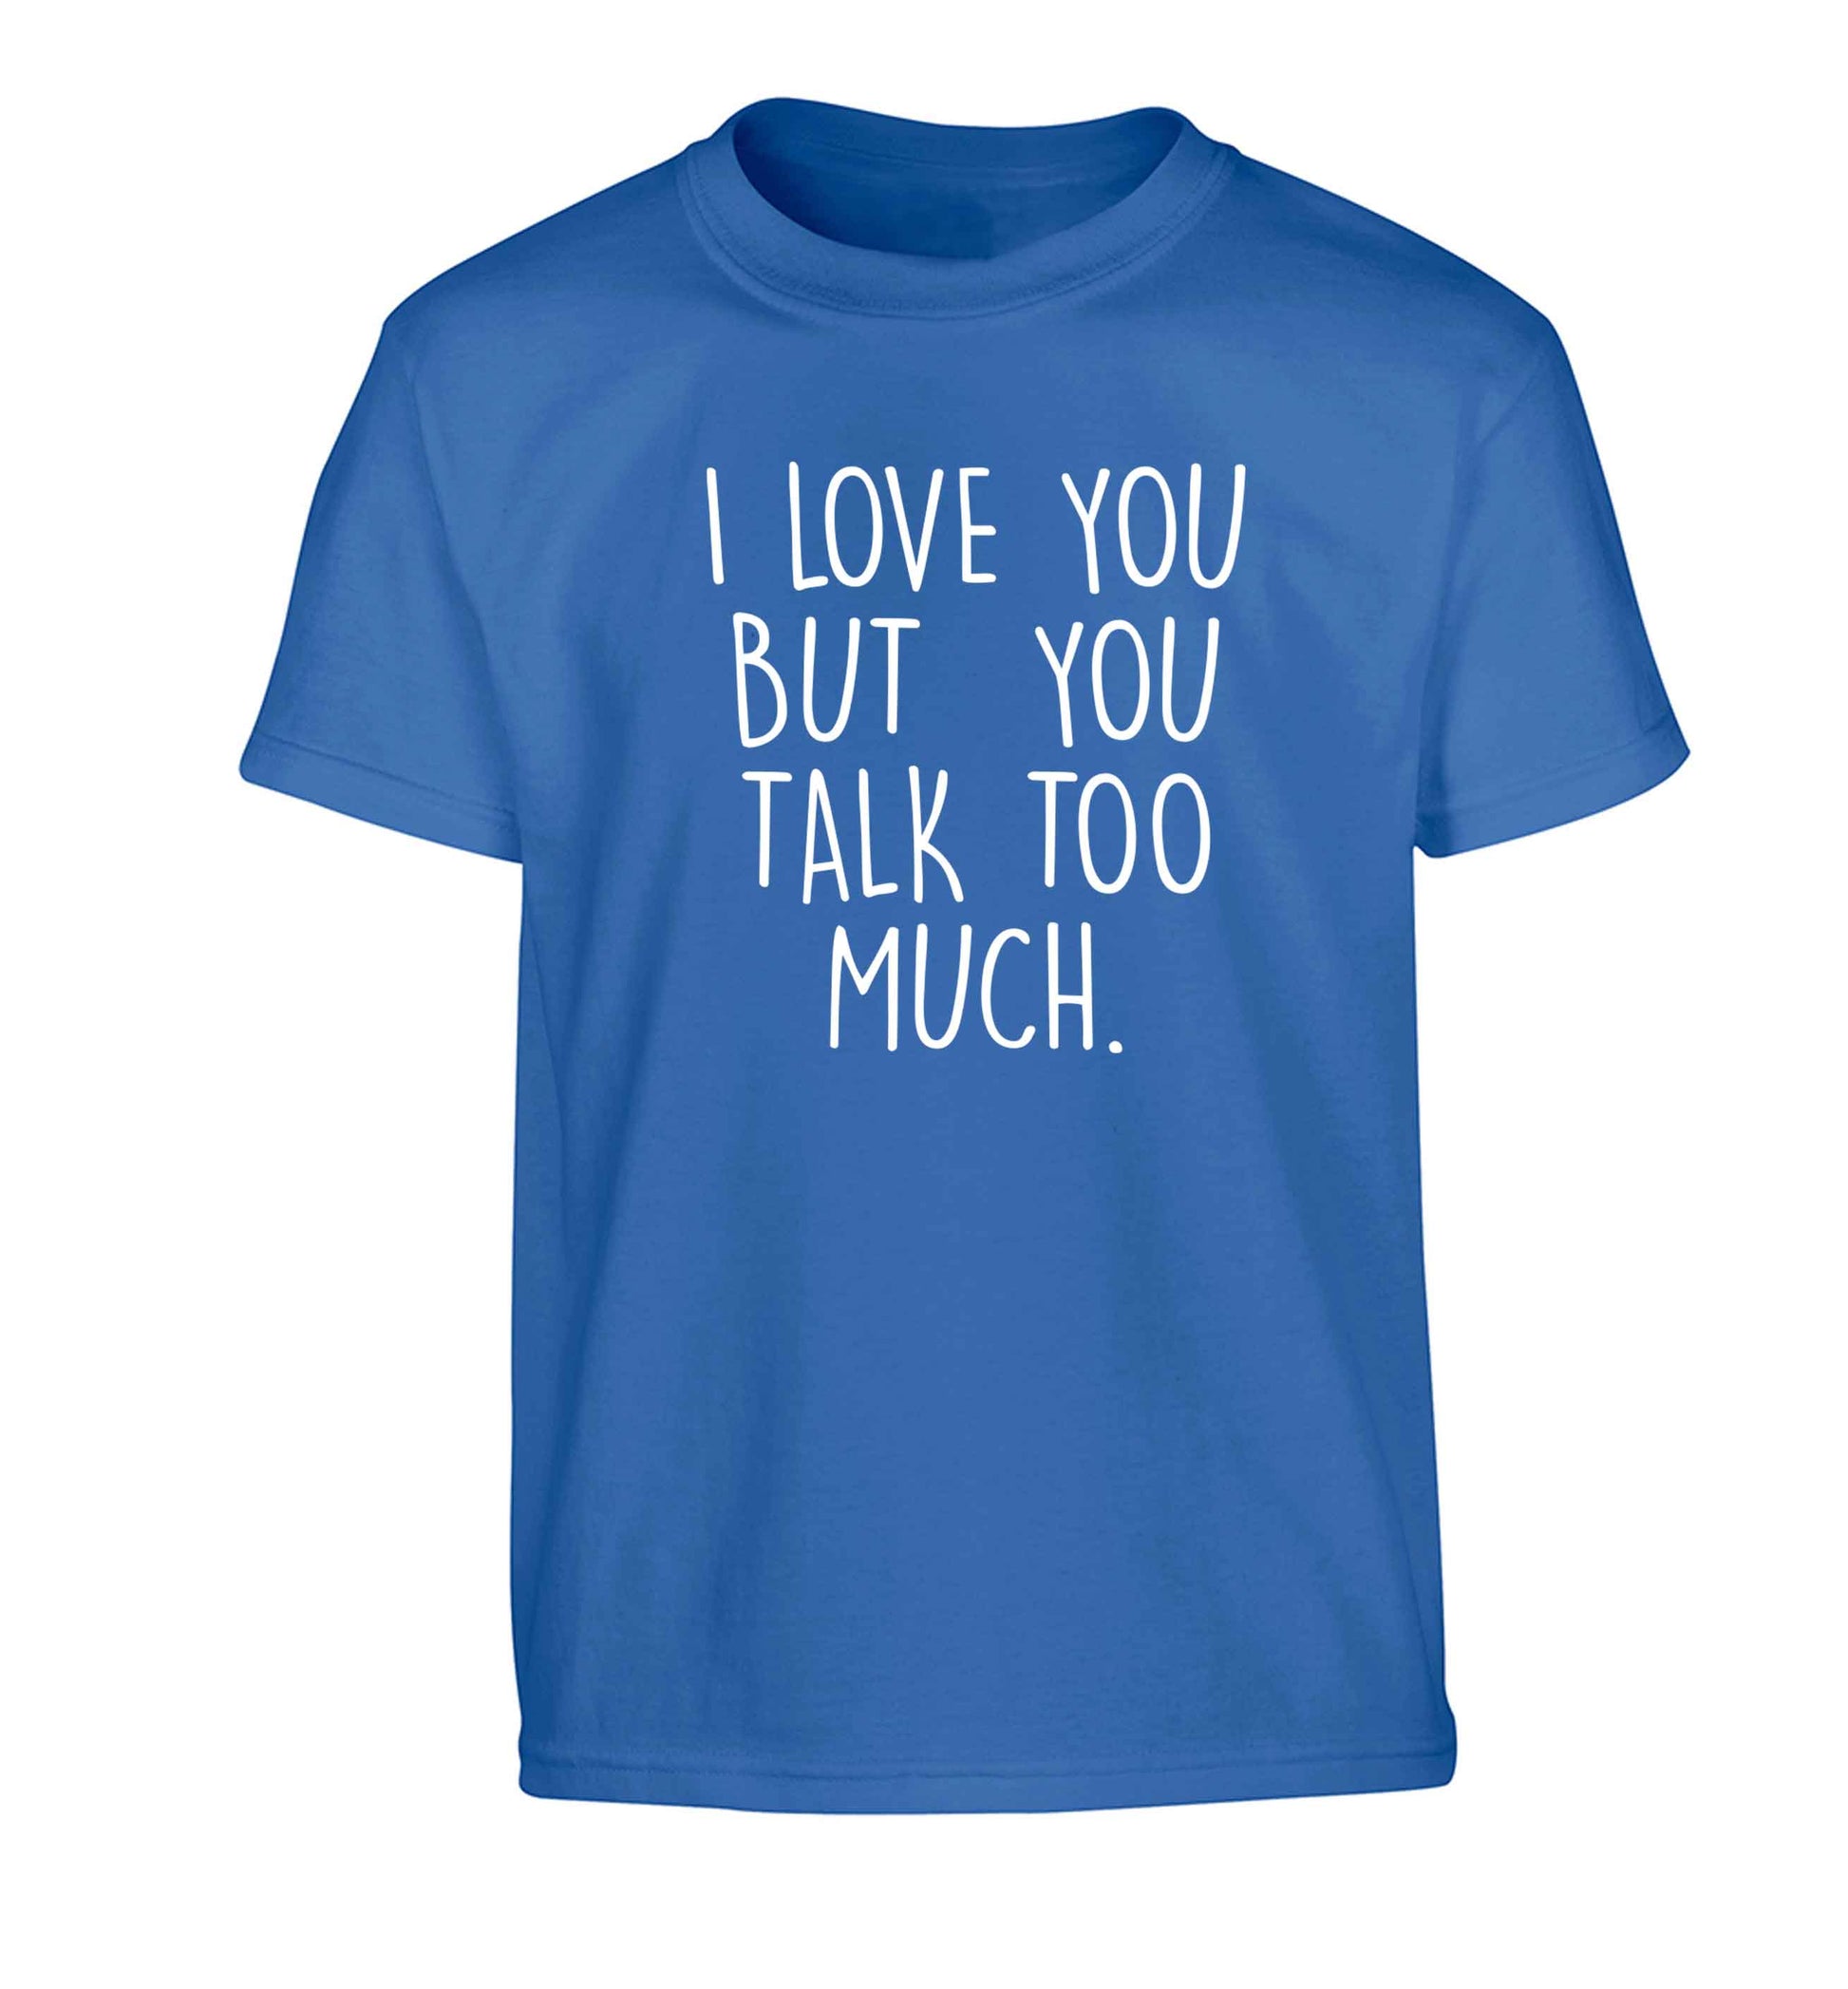 I love you but you talk too much Children's blue Tshirt 12-13 Years